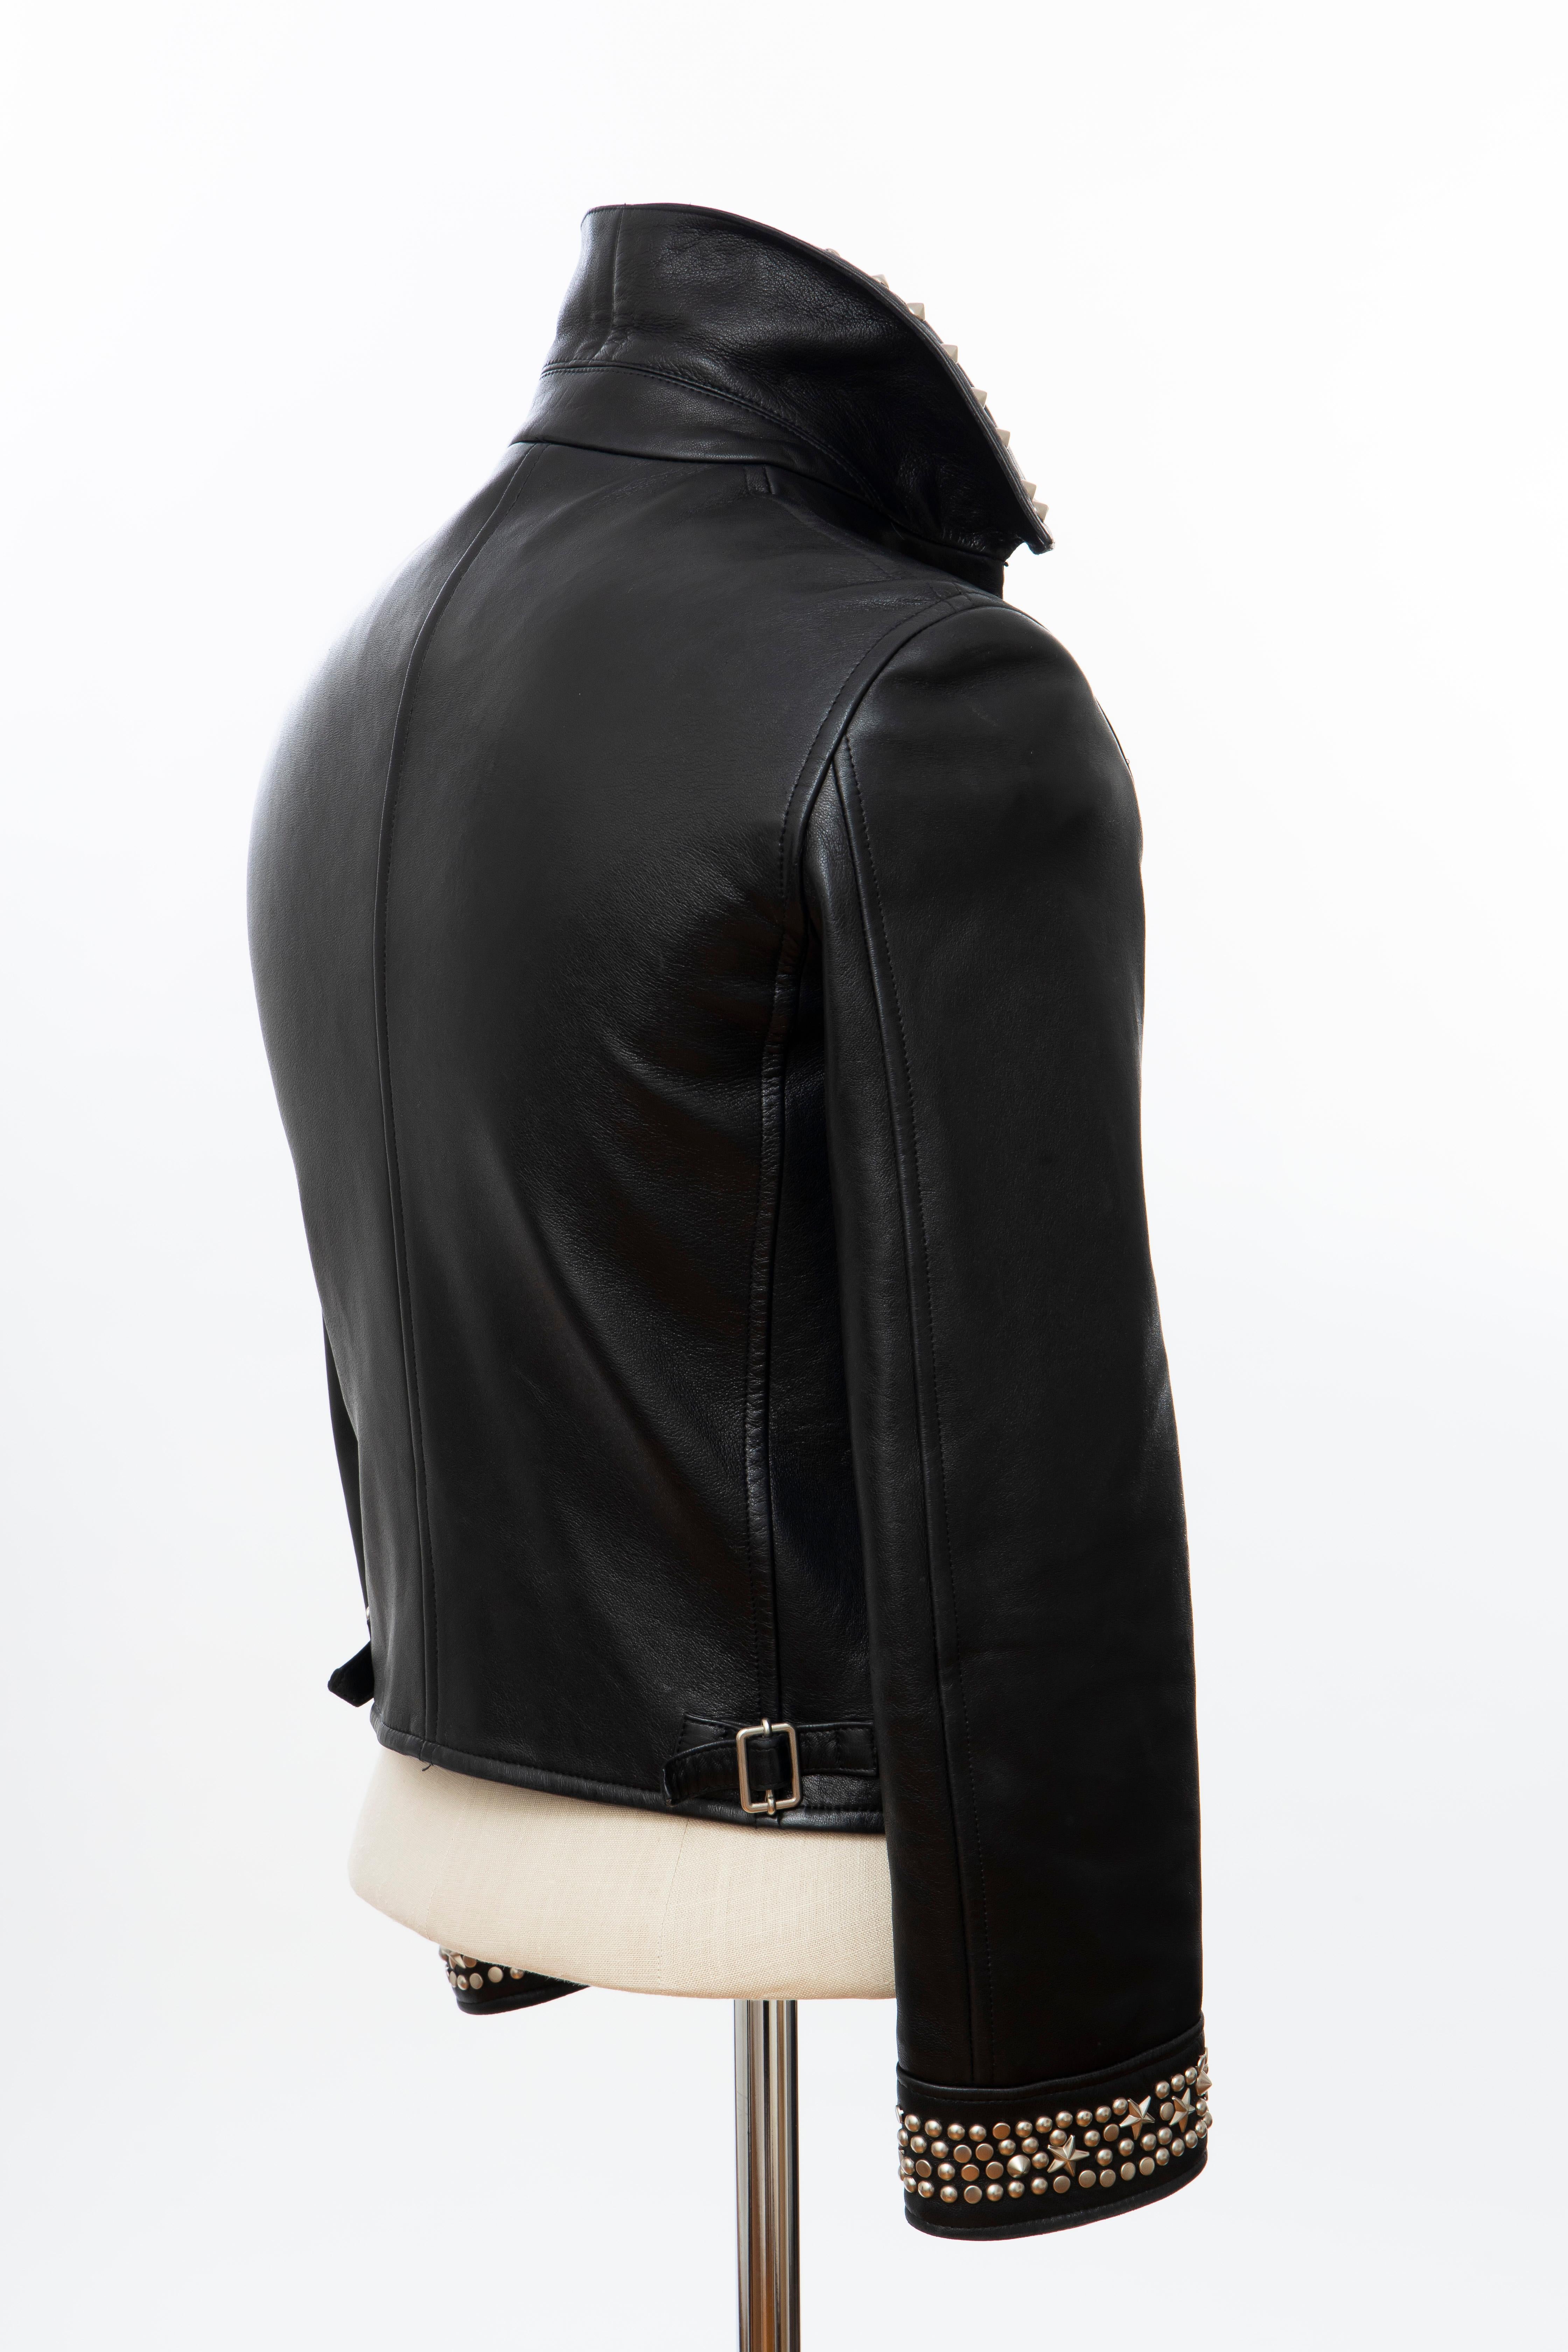 Gianni Versace Black Leather Jacket Pewter Stud Collar & Cuffs,  Circa: 1990's For Sale 1